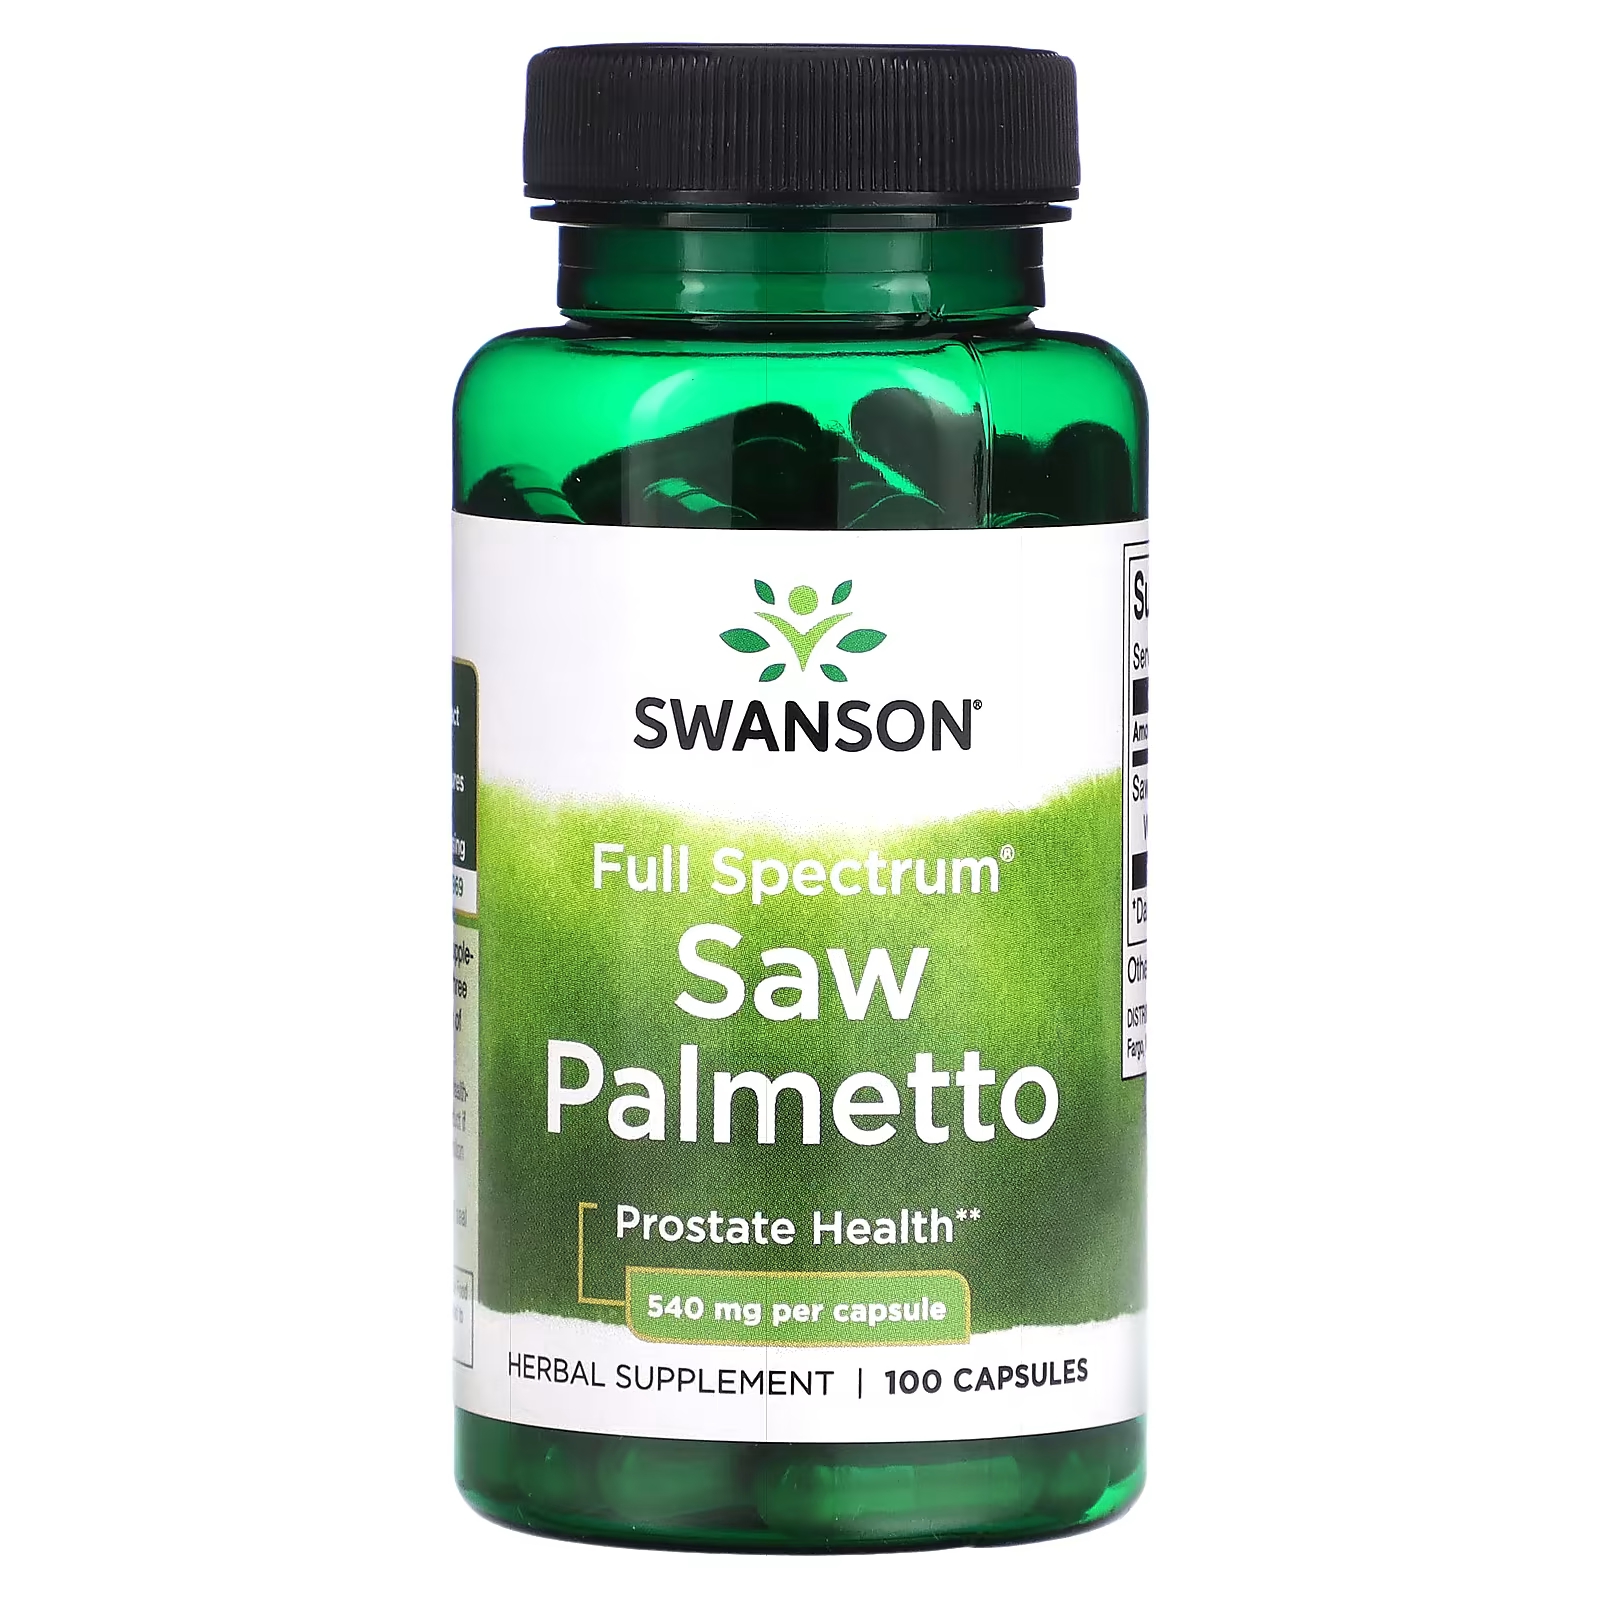 Swanson Saw Palmetto 540 мг 100 капсул swanson сереноа 540 мг 100 капсул